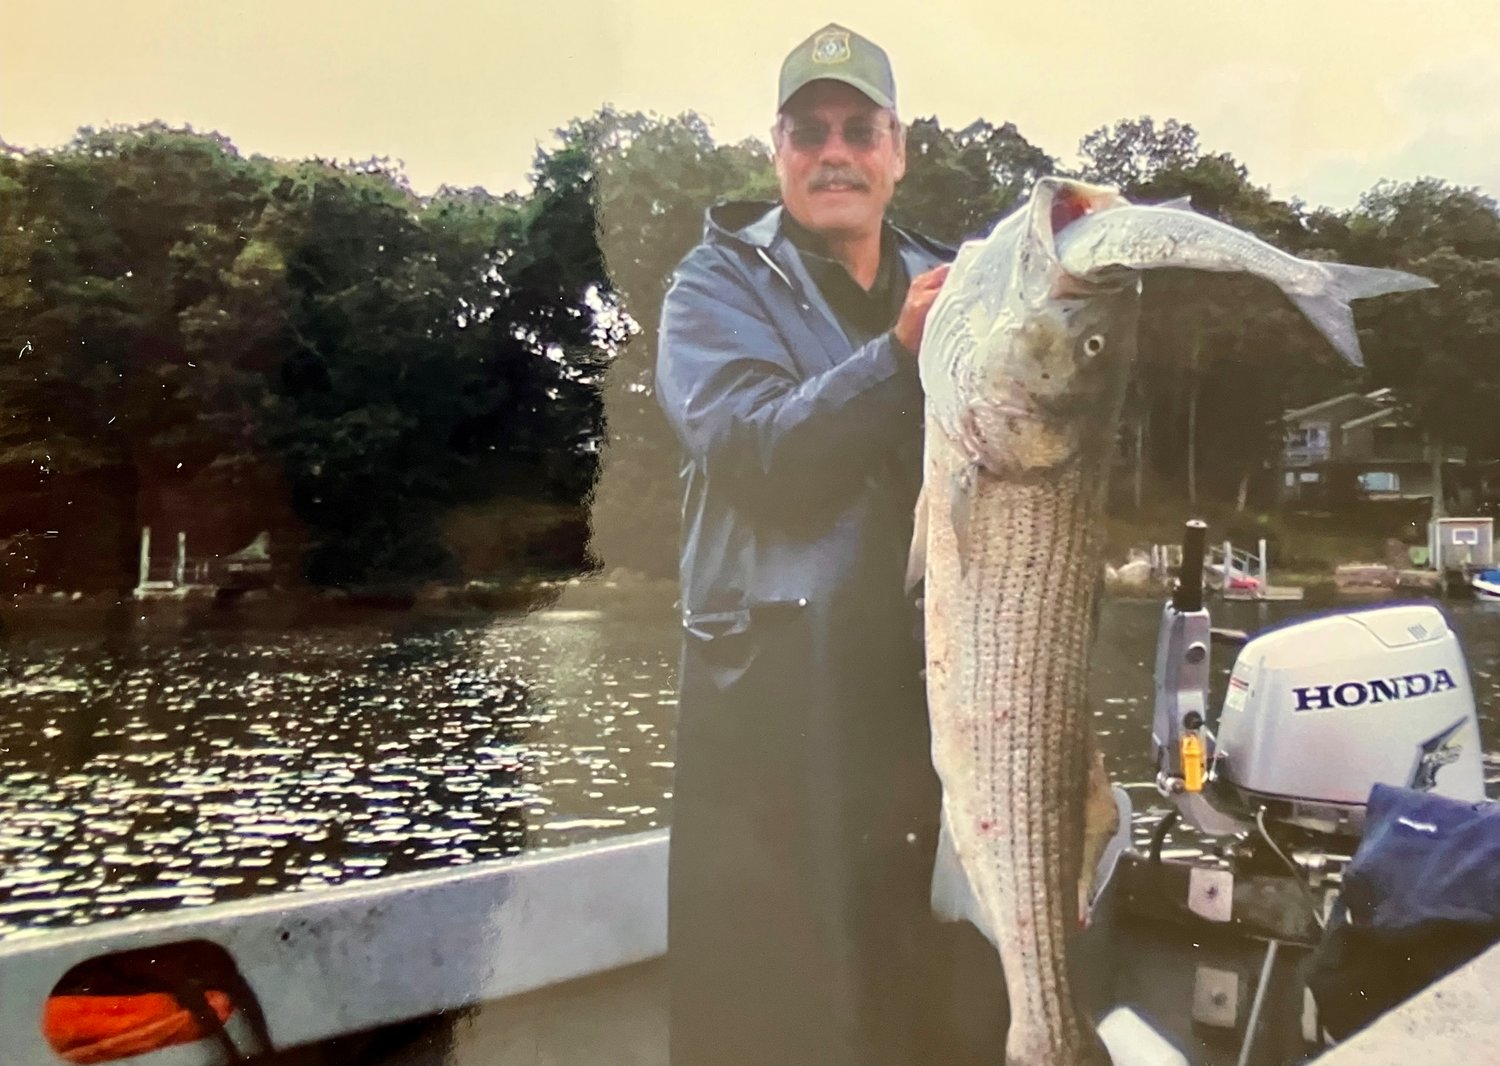 One of Janice Sherman's favorite photos of her late husband is this one taken some years ago. Helping with the annual seeding of shellfish in the Westport River one year, he spotted a big bass that had attempted to swallow a bluefish nearly its equal in size. He scooped both up over the skiff, proudly showing them off for the camera.